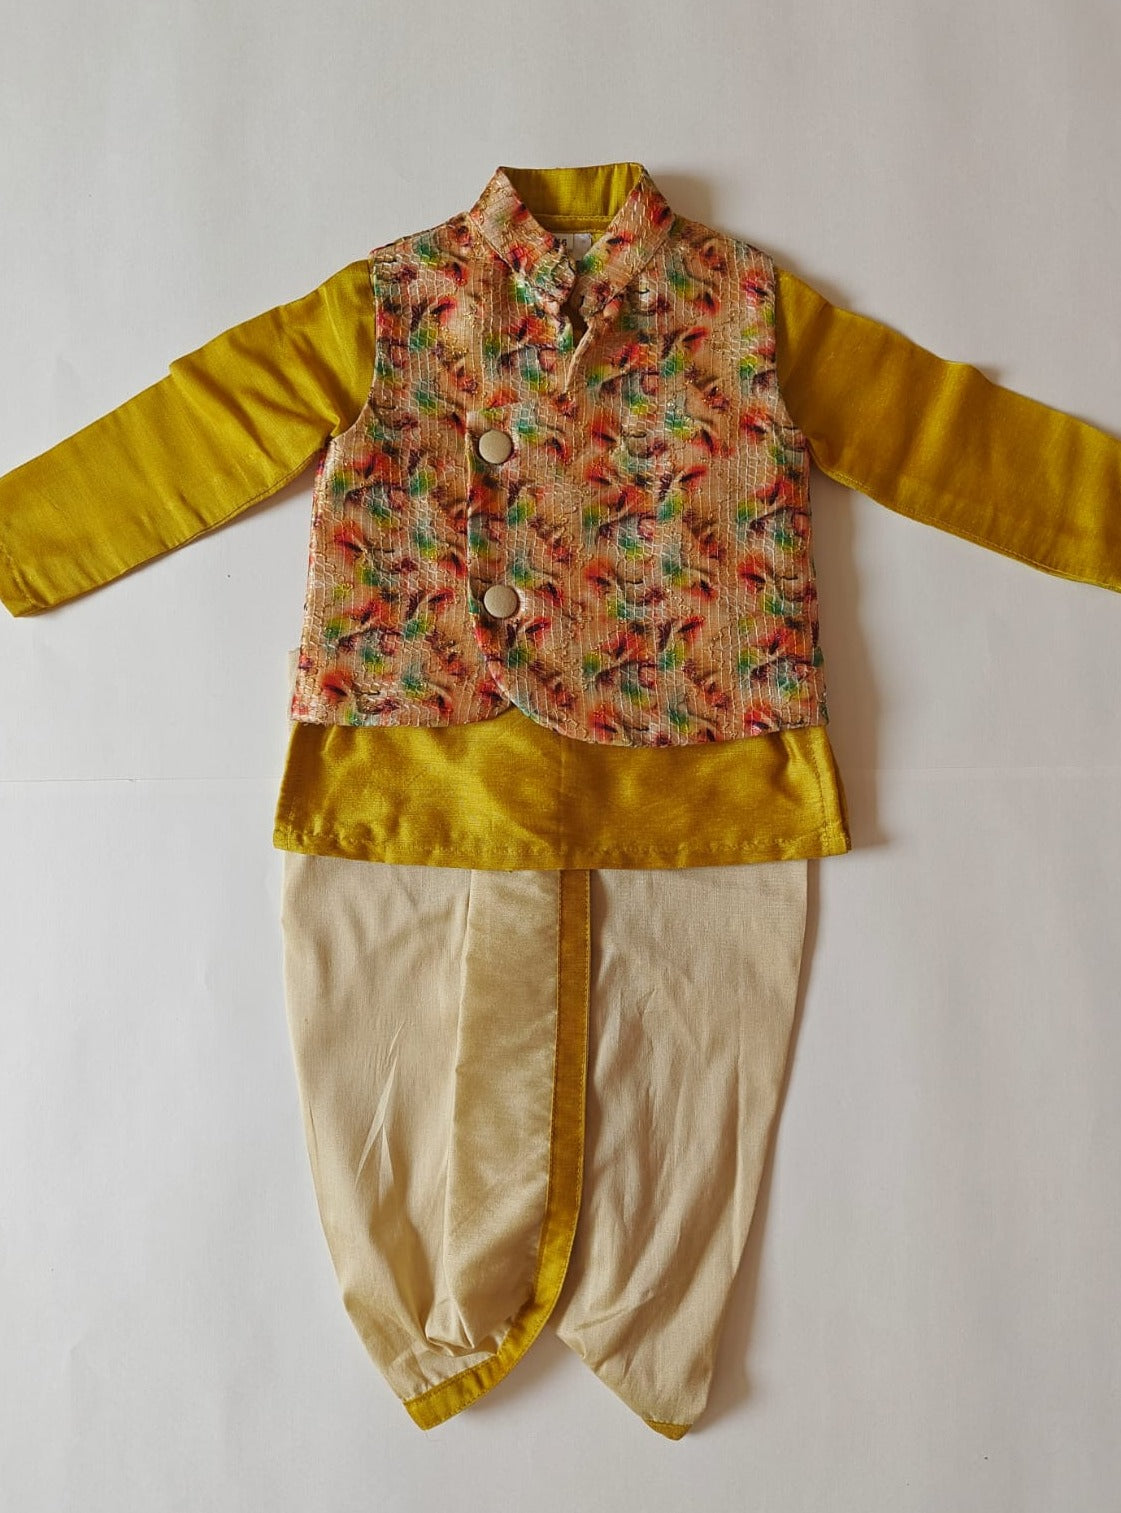 Olive Green cotton silk round neck kurta, Golden cotton silk dhoti with Tussar silk Jacket for Baby Boy.It's the perfect outfit for your baby's naming ceremony,naamkaran,annaprashan ceremony.Traditional dress for Noolukettu Ceremony,Pachavi Puja,cradle ceremony,Rice Ceremony,Chatti Puja etc. Apt gifting idea